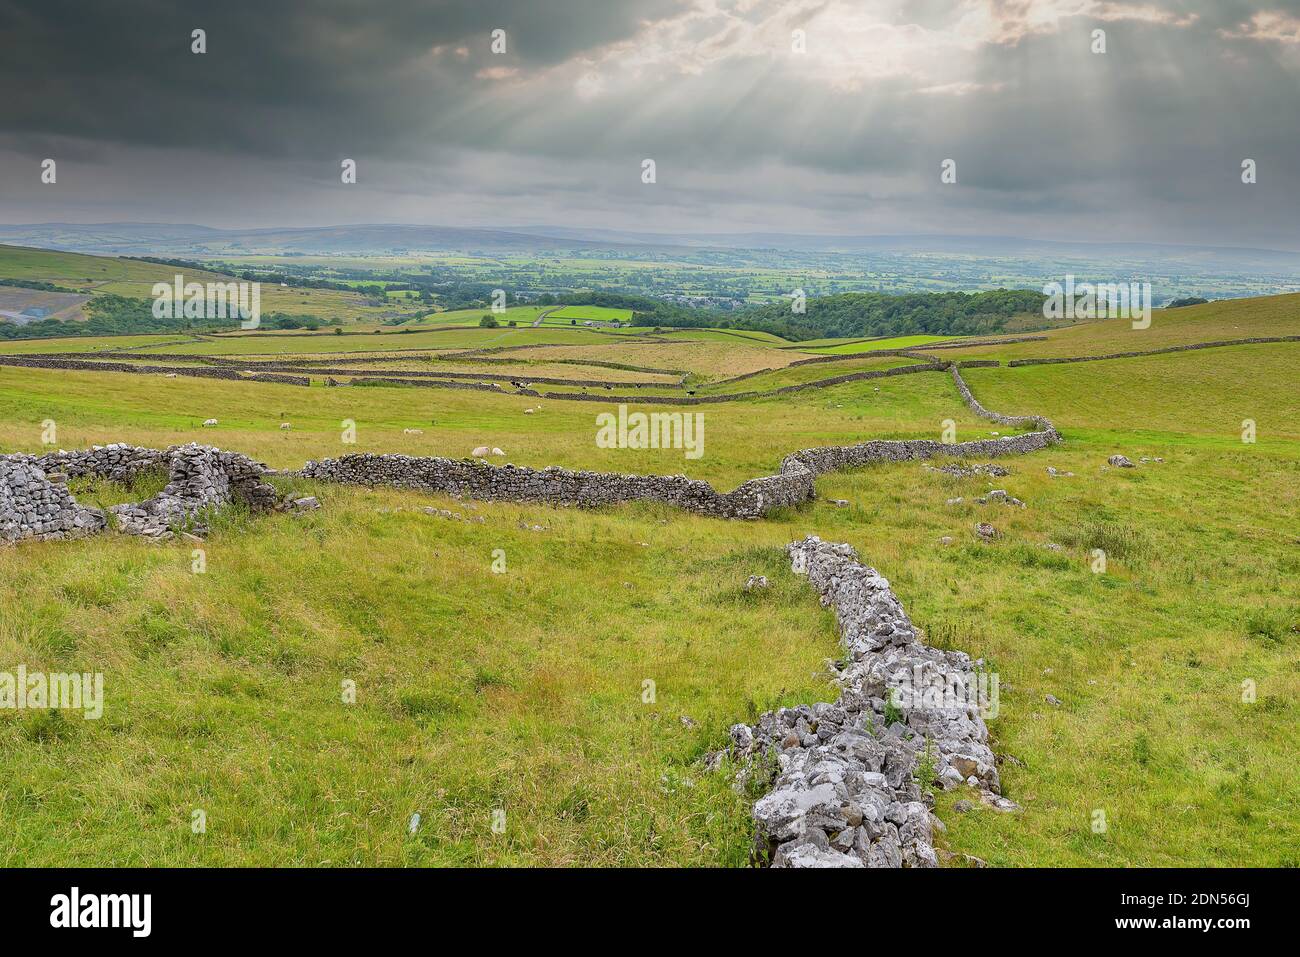 Cotterdale, Yorkshire Dales National Park, York, Uk - A view of the rolling landscape of the Yorkshire Dales. Stock Photo